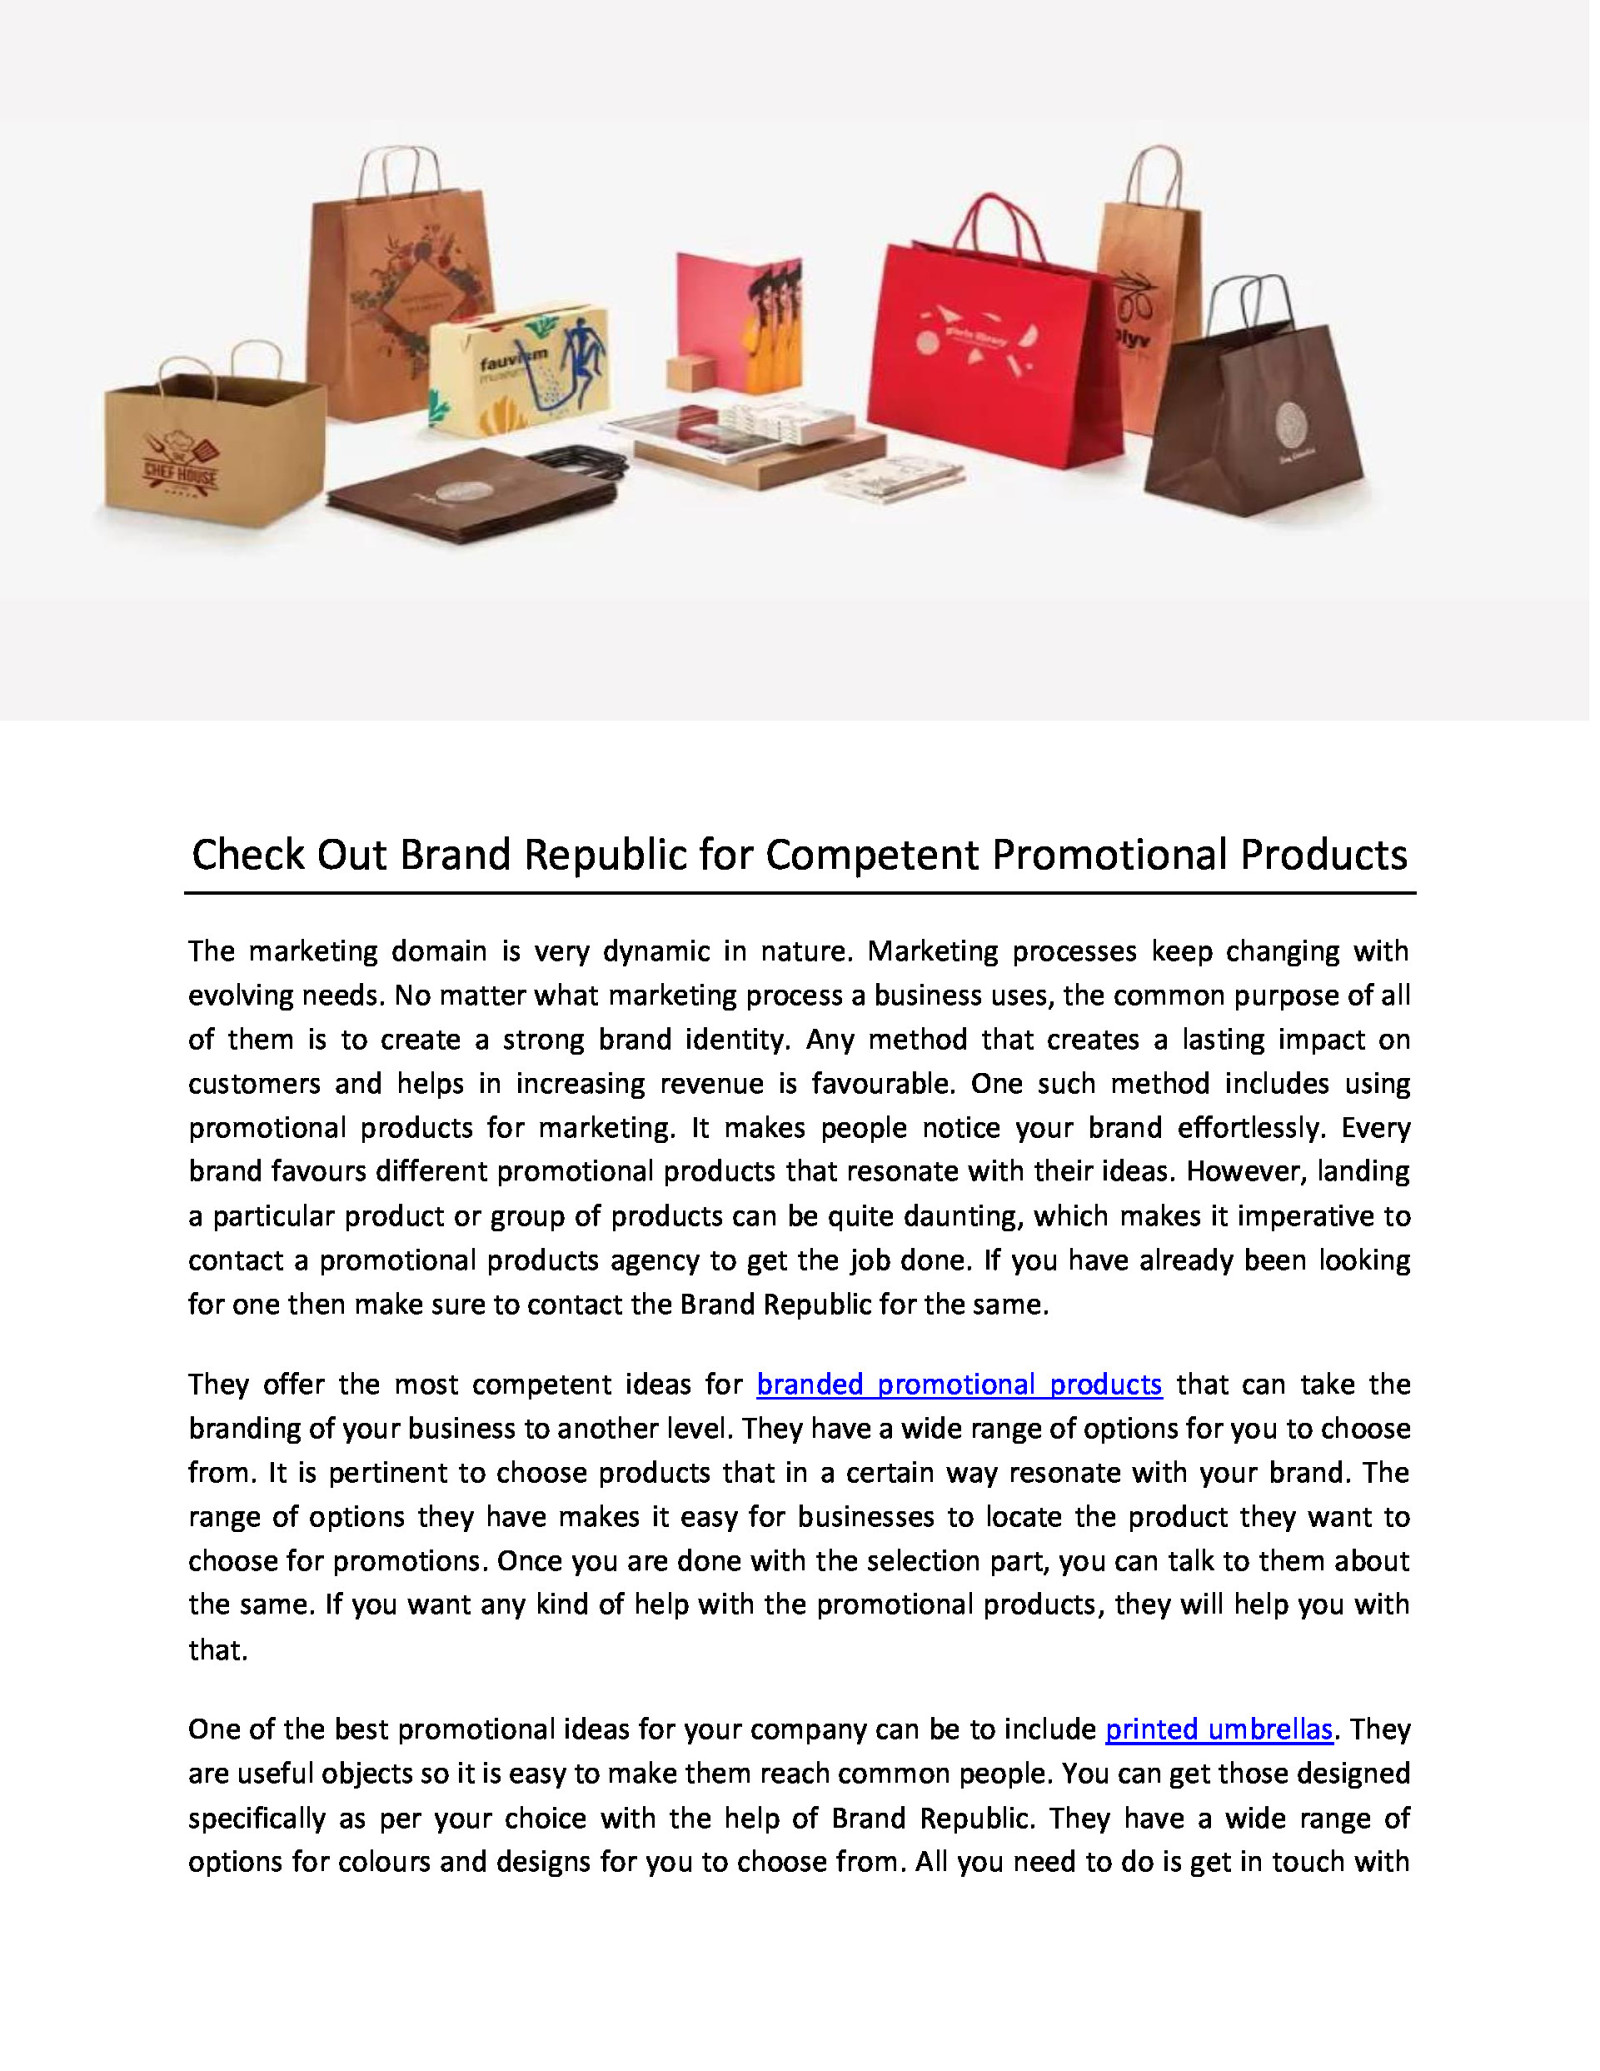 Check Out Brand Republic for Competent Promotional Products